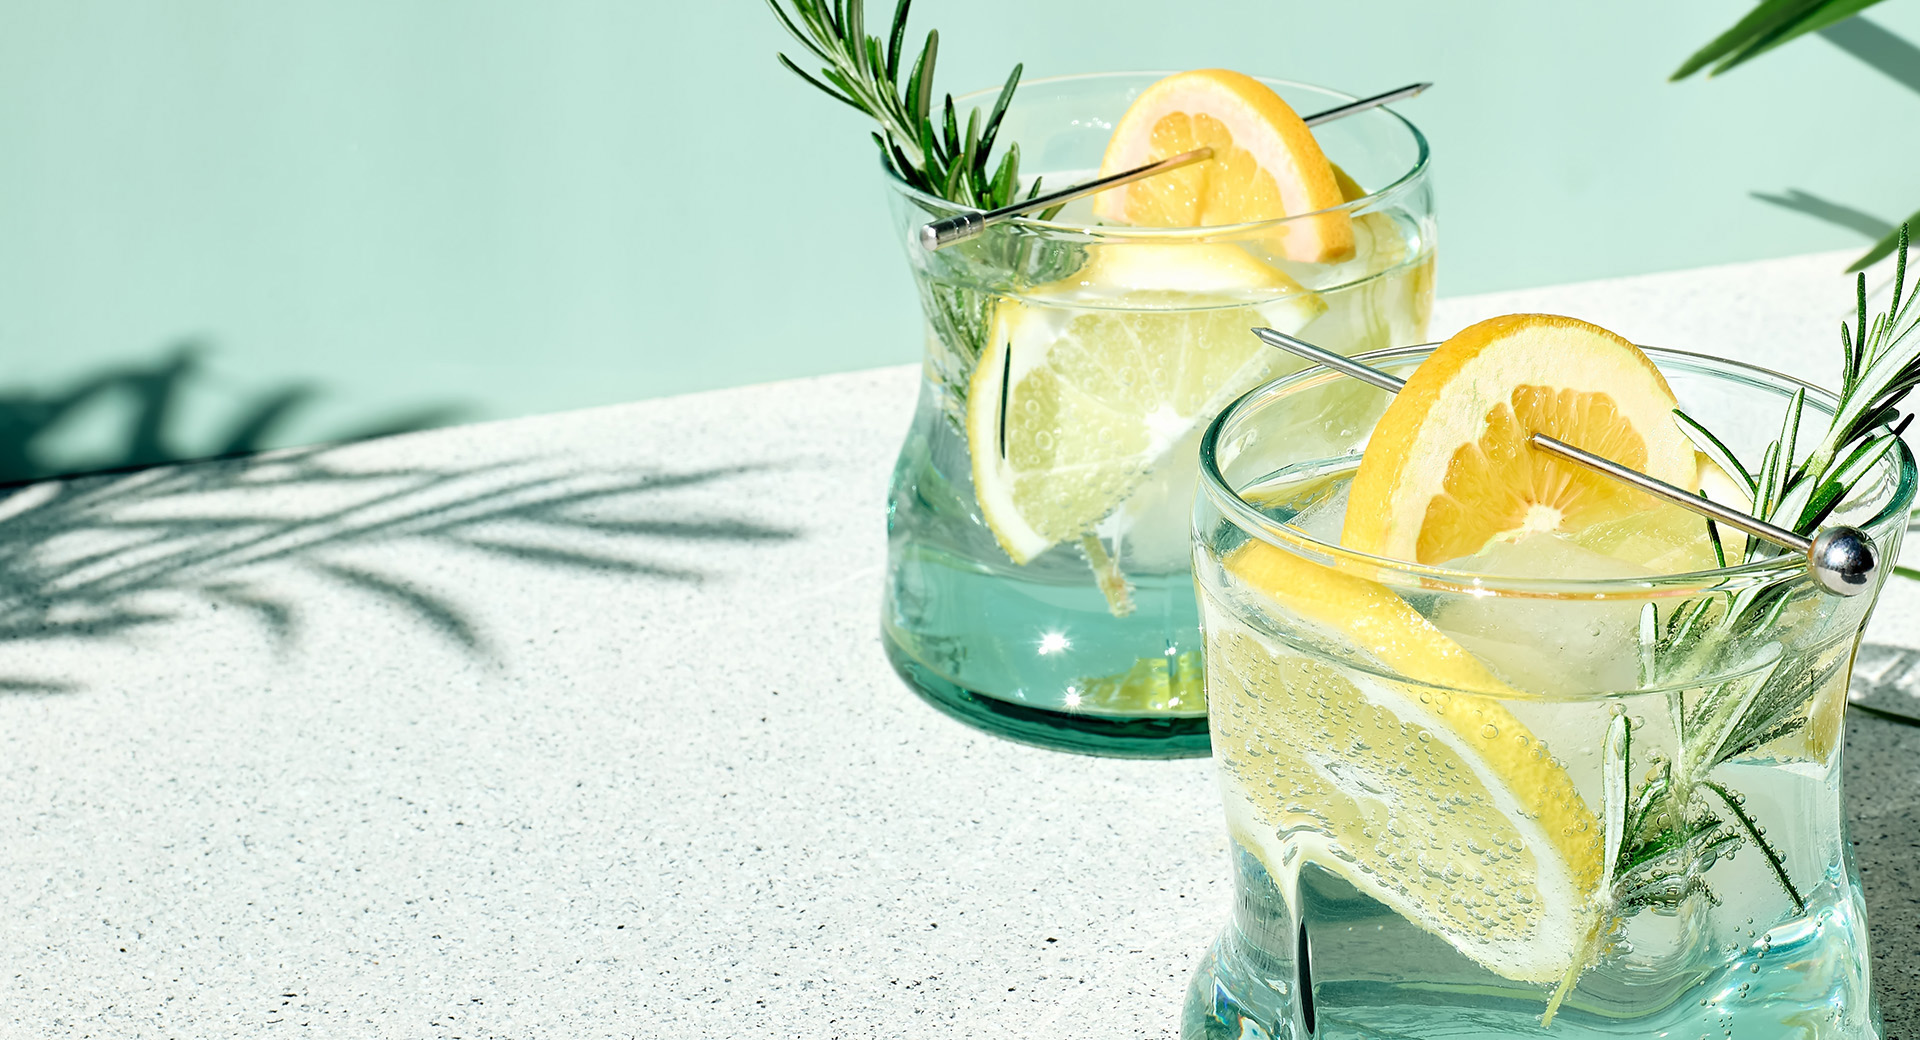 Two glasses with lemon slices and rosemary sprigs